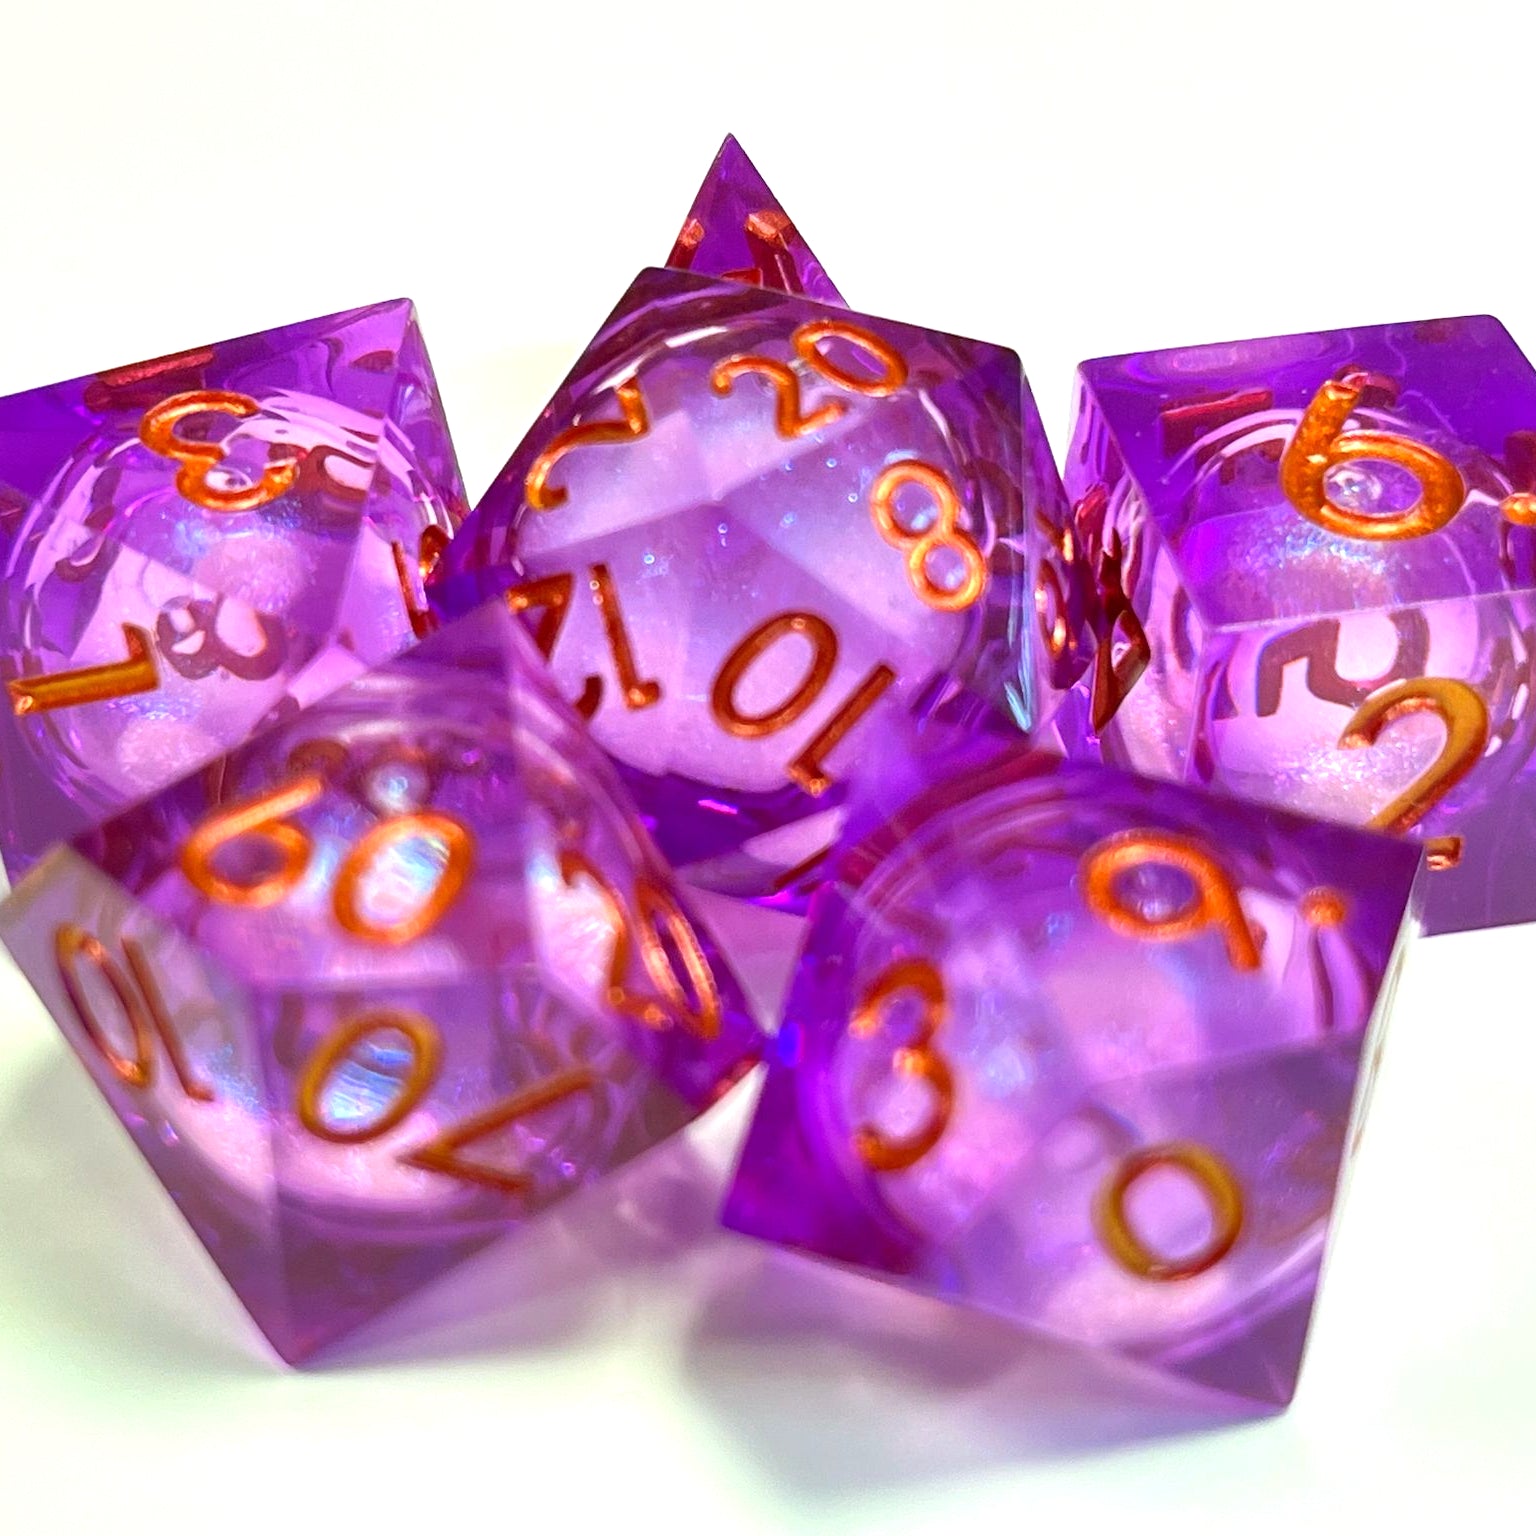 Cherry Bomb TTRPG liquid core sharp edge dice set for role playing games and dice goblins